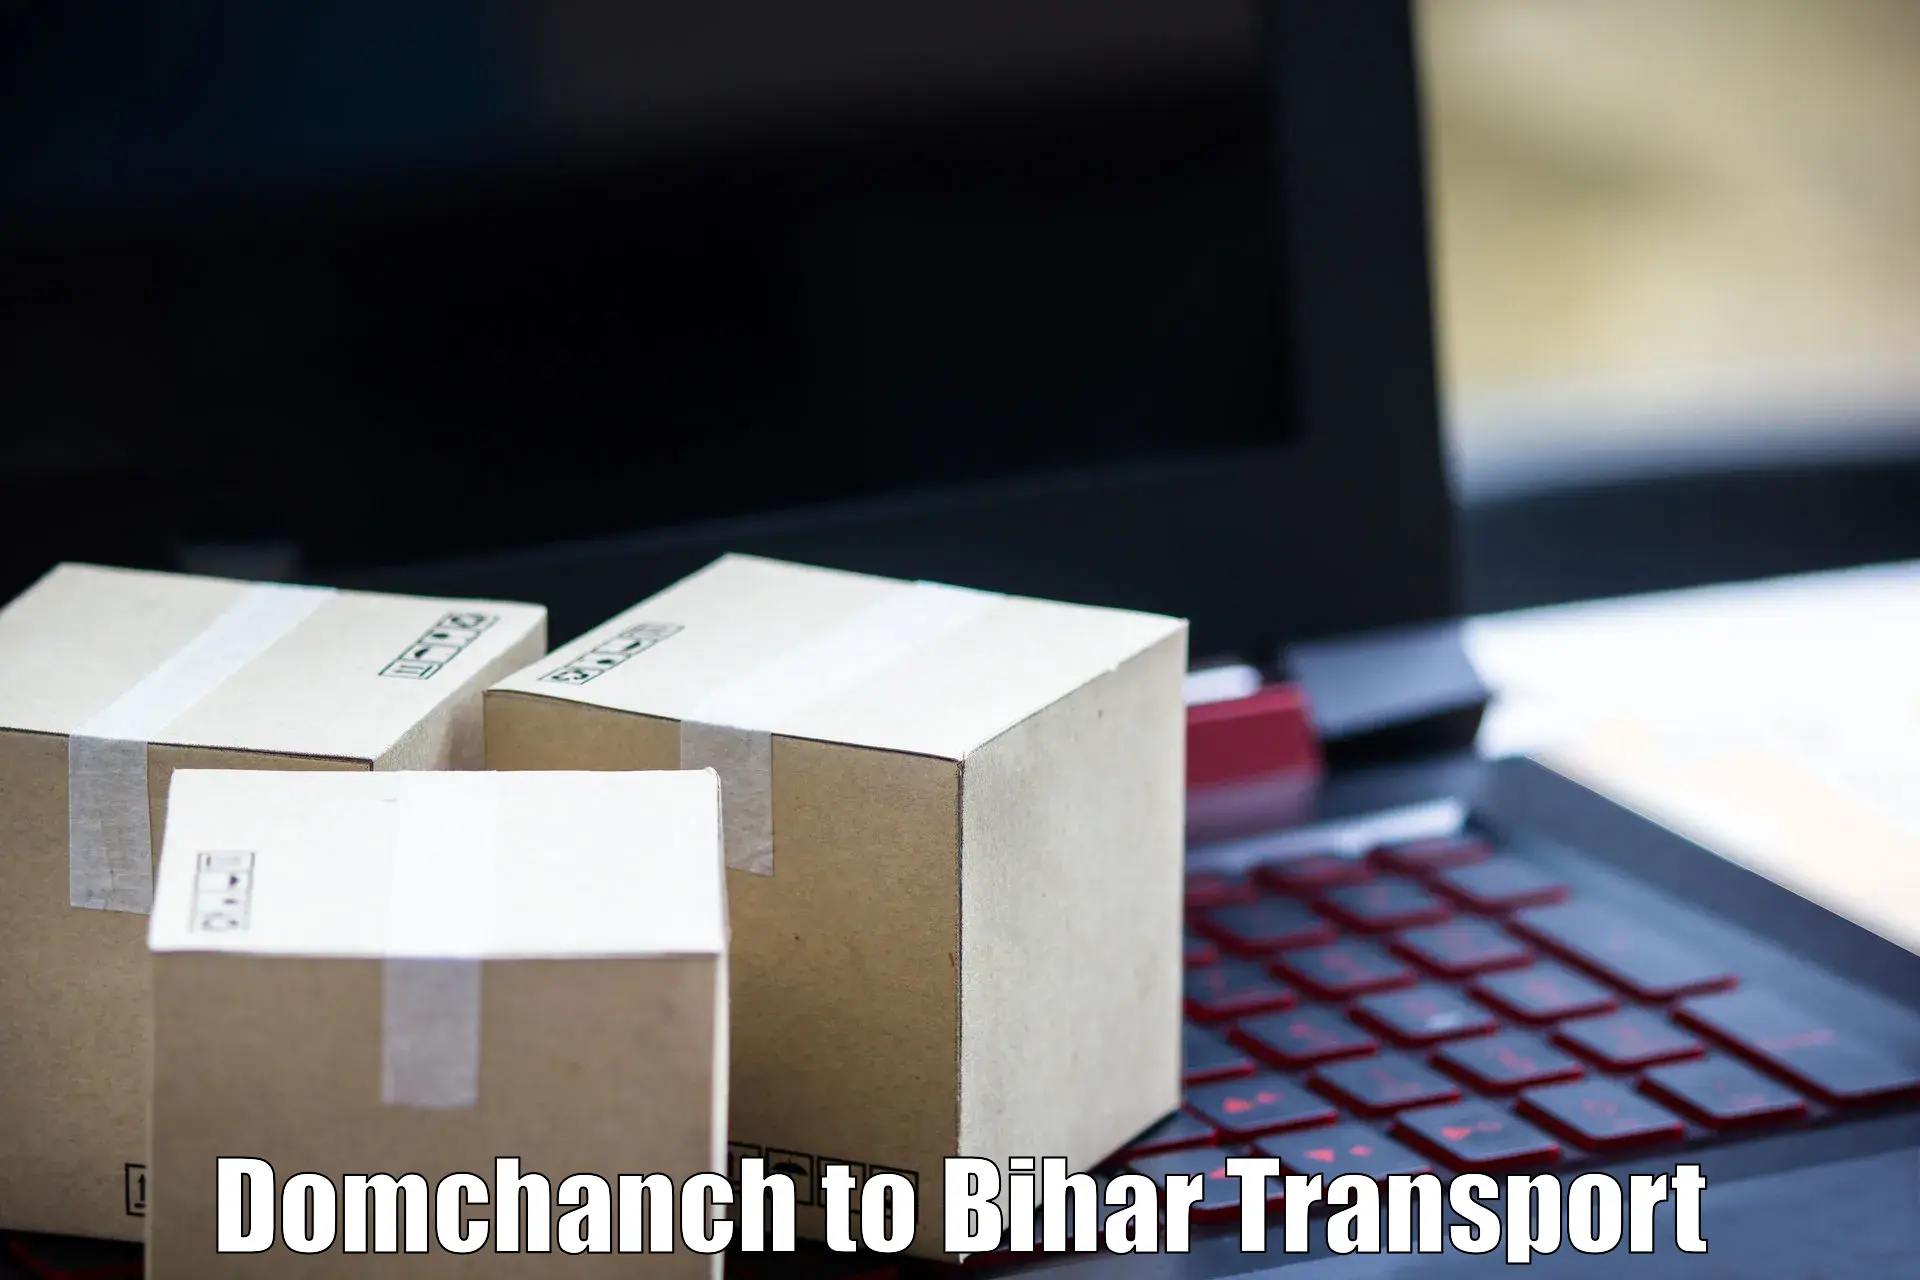 Transport shared services Domchanch to Arrah